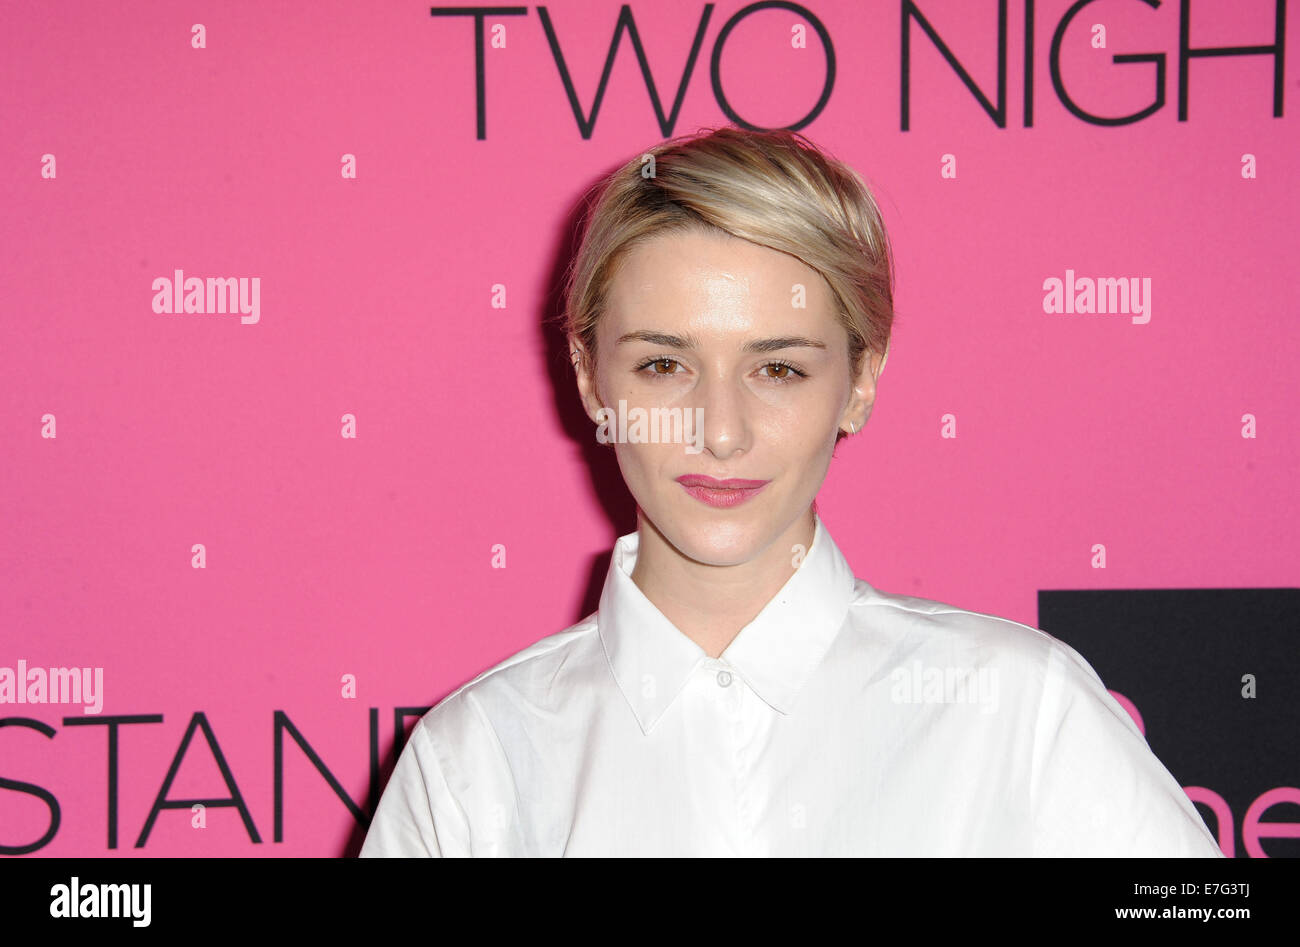 Los Angeles, California, USA. 16th Sep, 2014. Addison Timlin attending the Los Angeles Premiere of ''Two Night Stand'' held at the TCL Chinese 6 Theatre in Hollywood, California on September 16, 2014. 2014 Credit:  D. Long/Globe Photos/ZUMA Wire/Alamy Live News Stock Photo